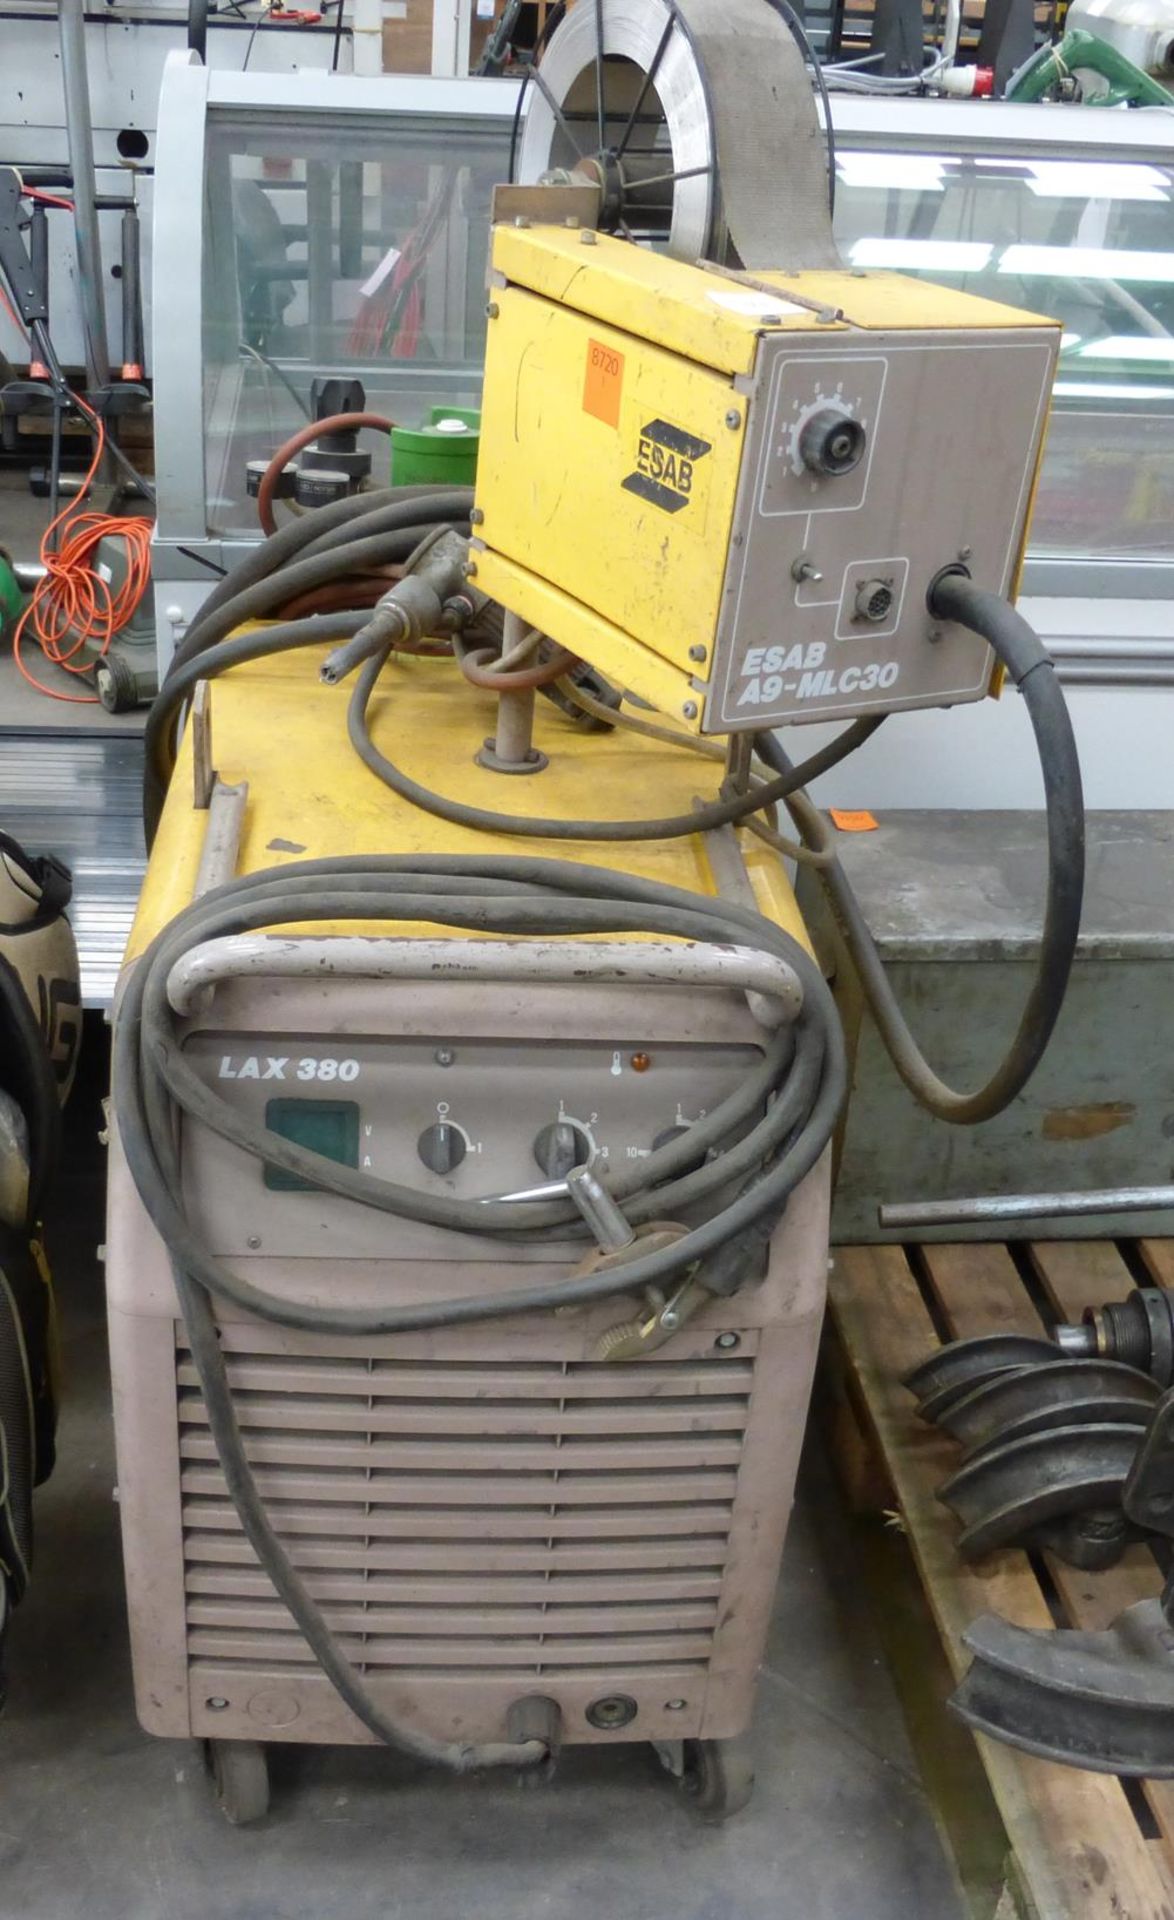 * An Esab LAX 380/A9-MLC30 Welder, 3PH. Please note there is a £10 + VAT Lift Out Fee on this lot